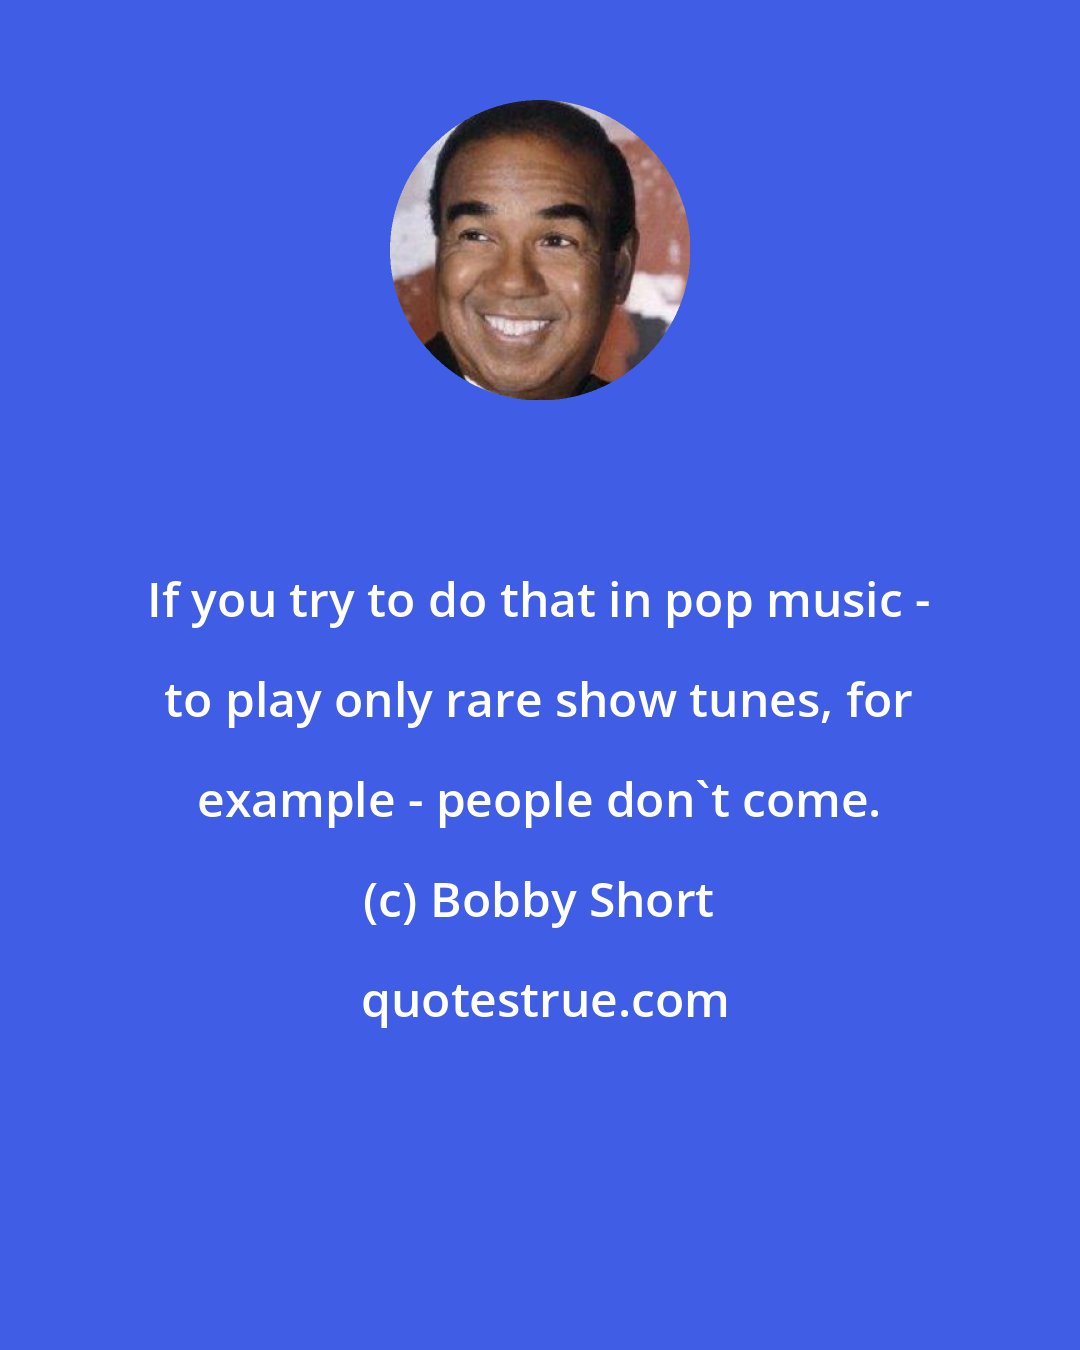 Bobby Short: If you try to do that in pop music - to play only rare show tunes, for example - people don't come.